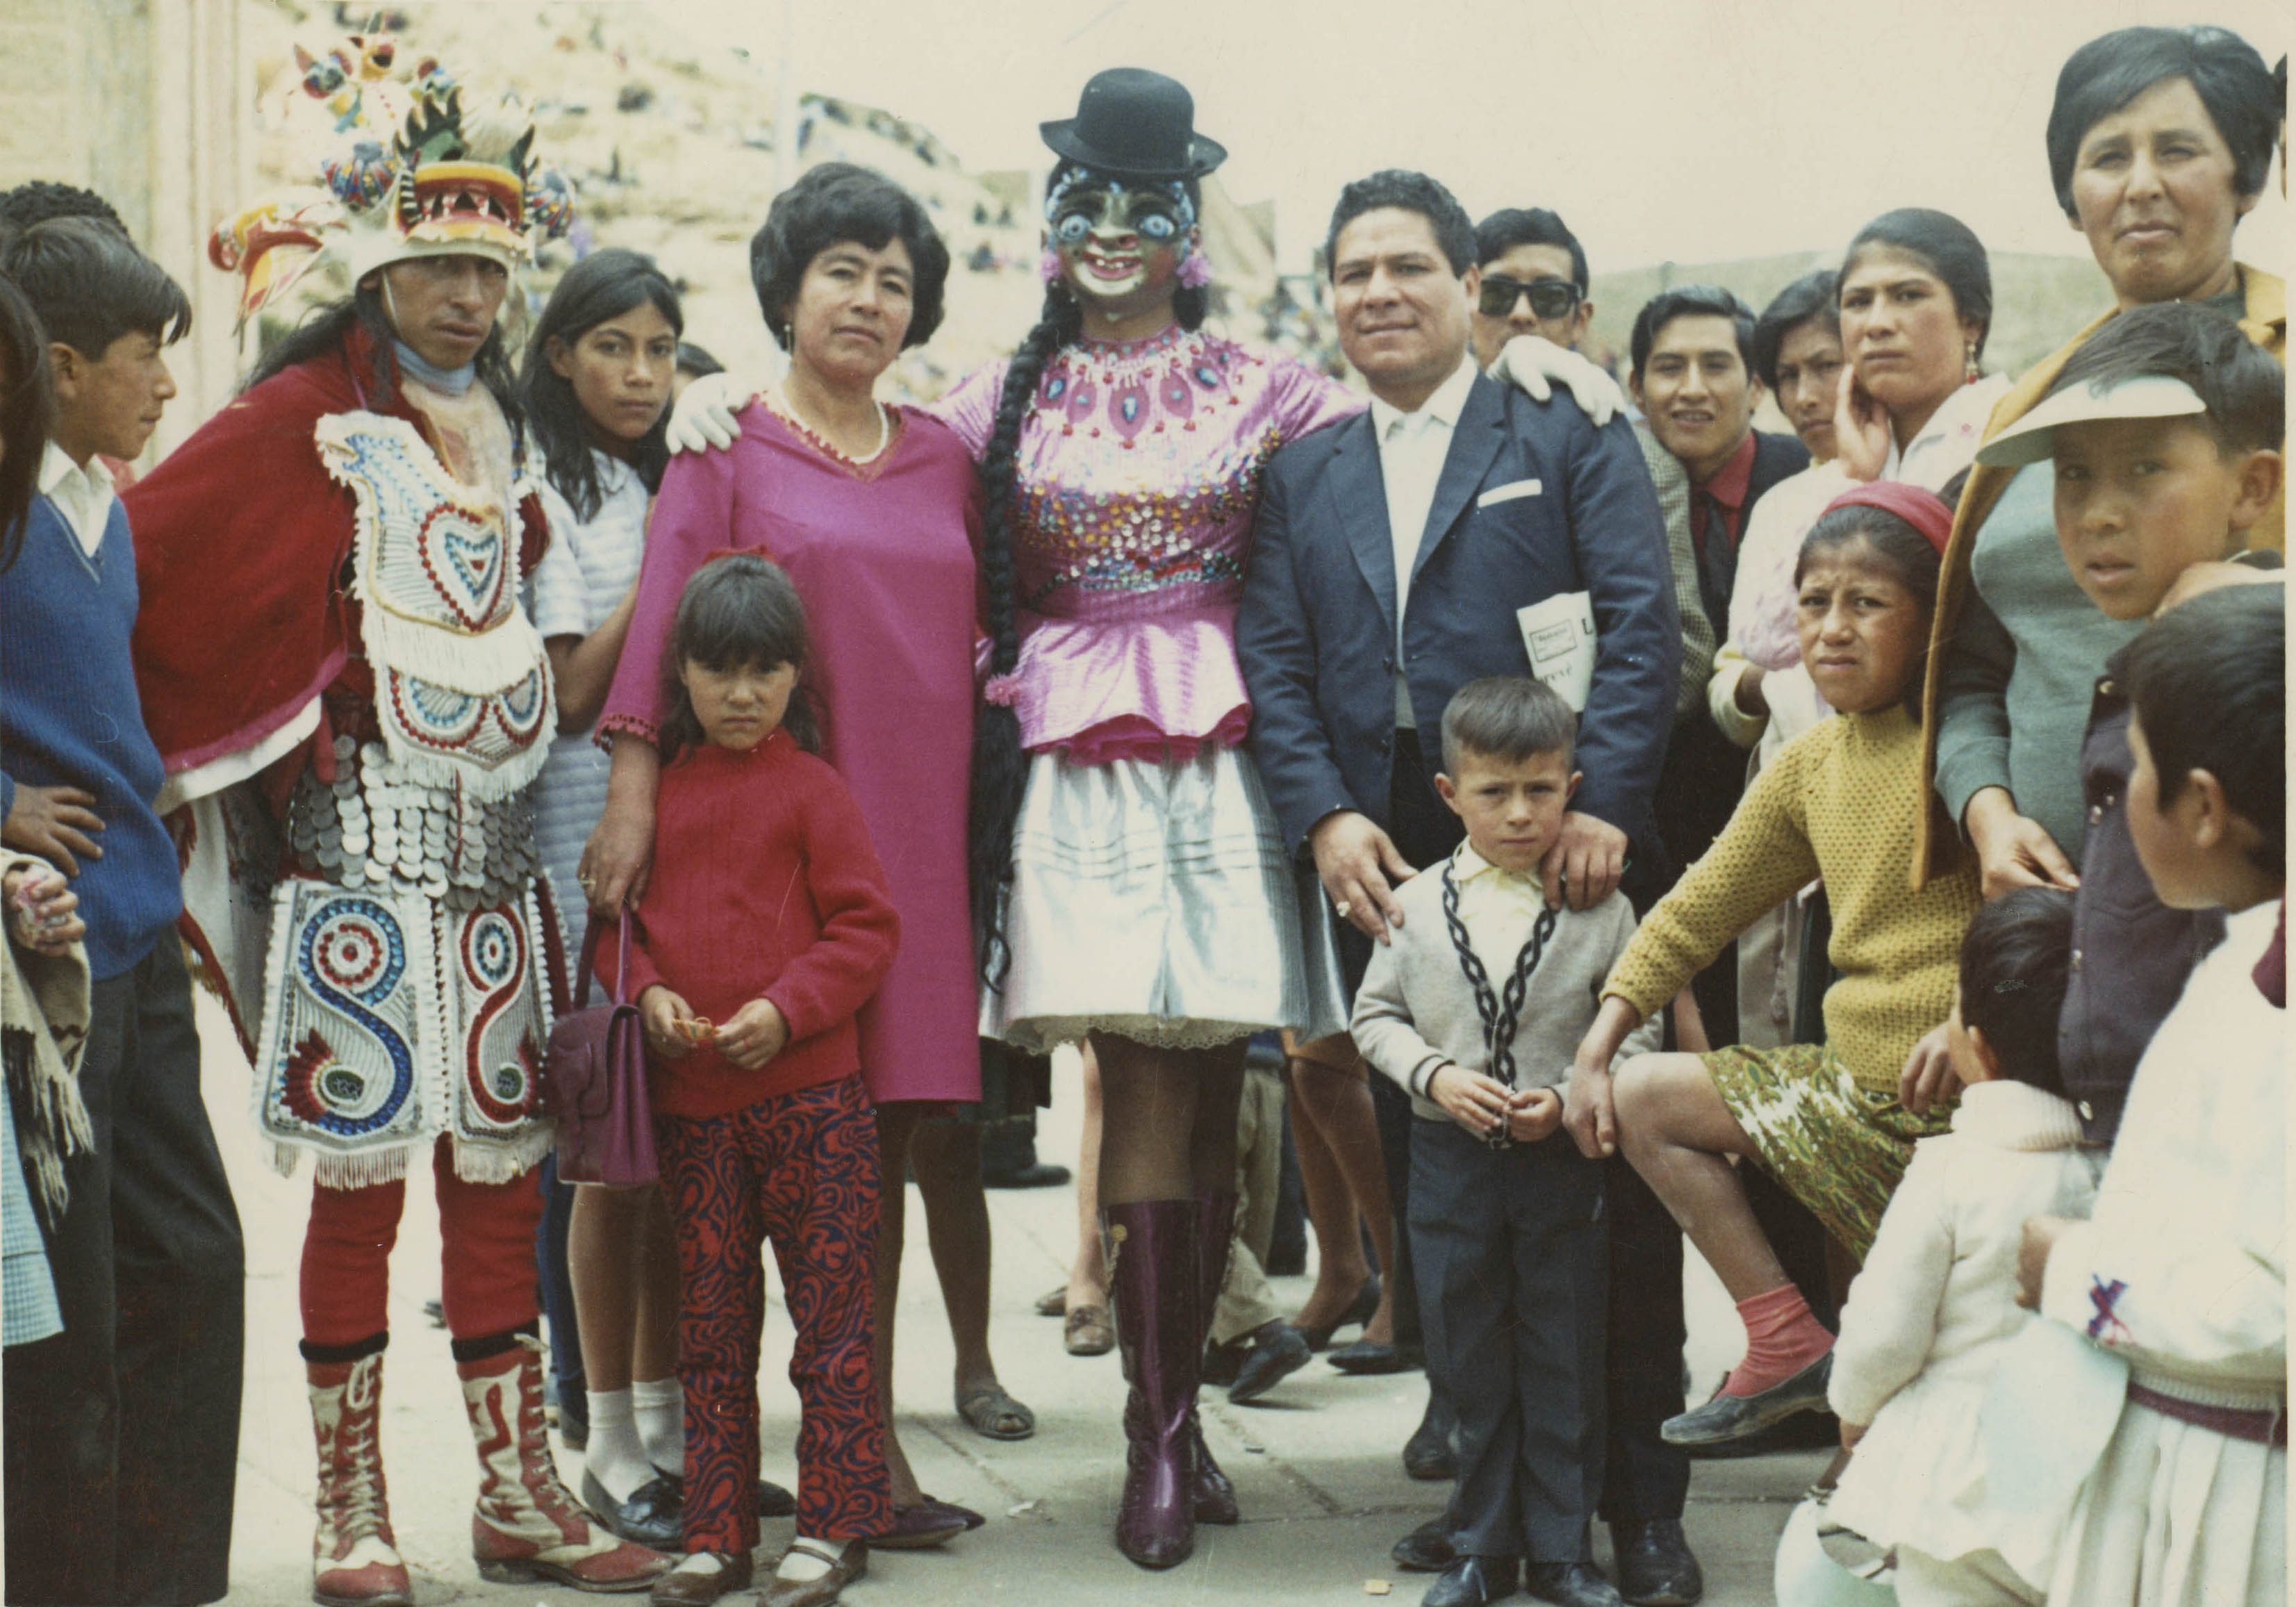 A travesti performer dressed as La China Morena in Bolivia, stood with a family 